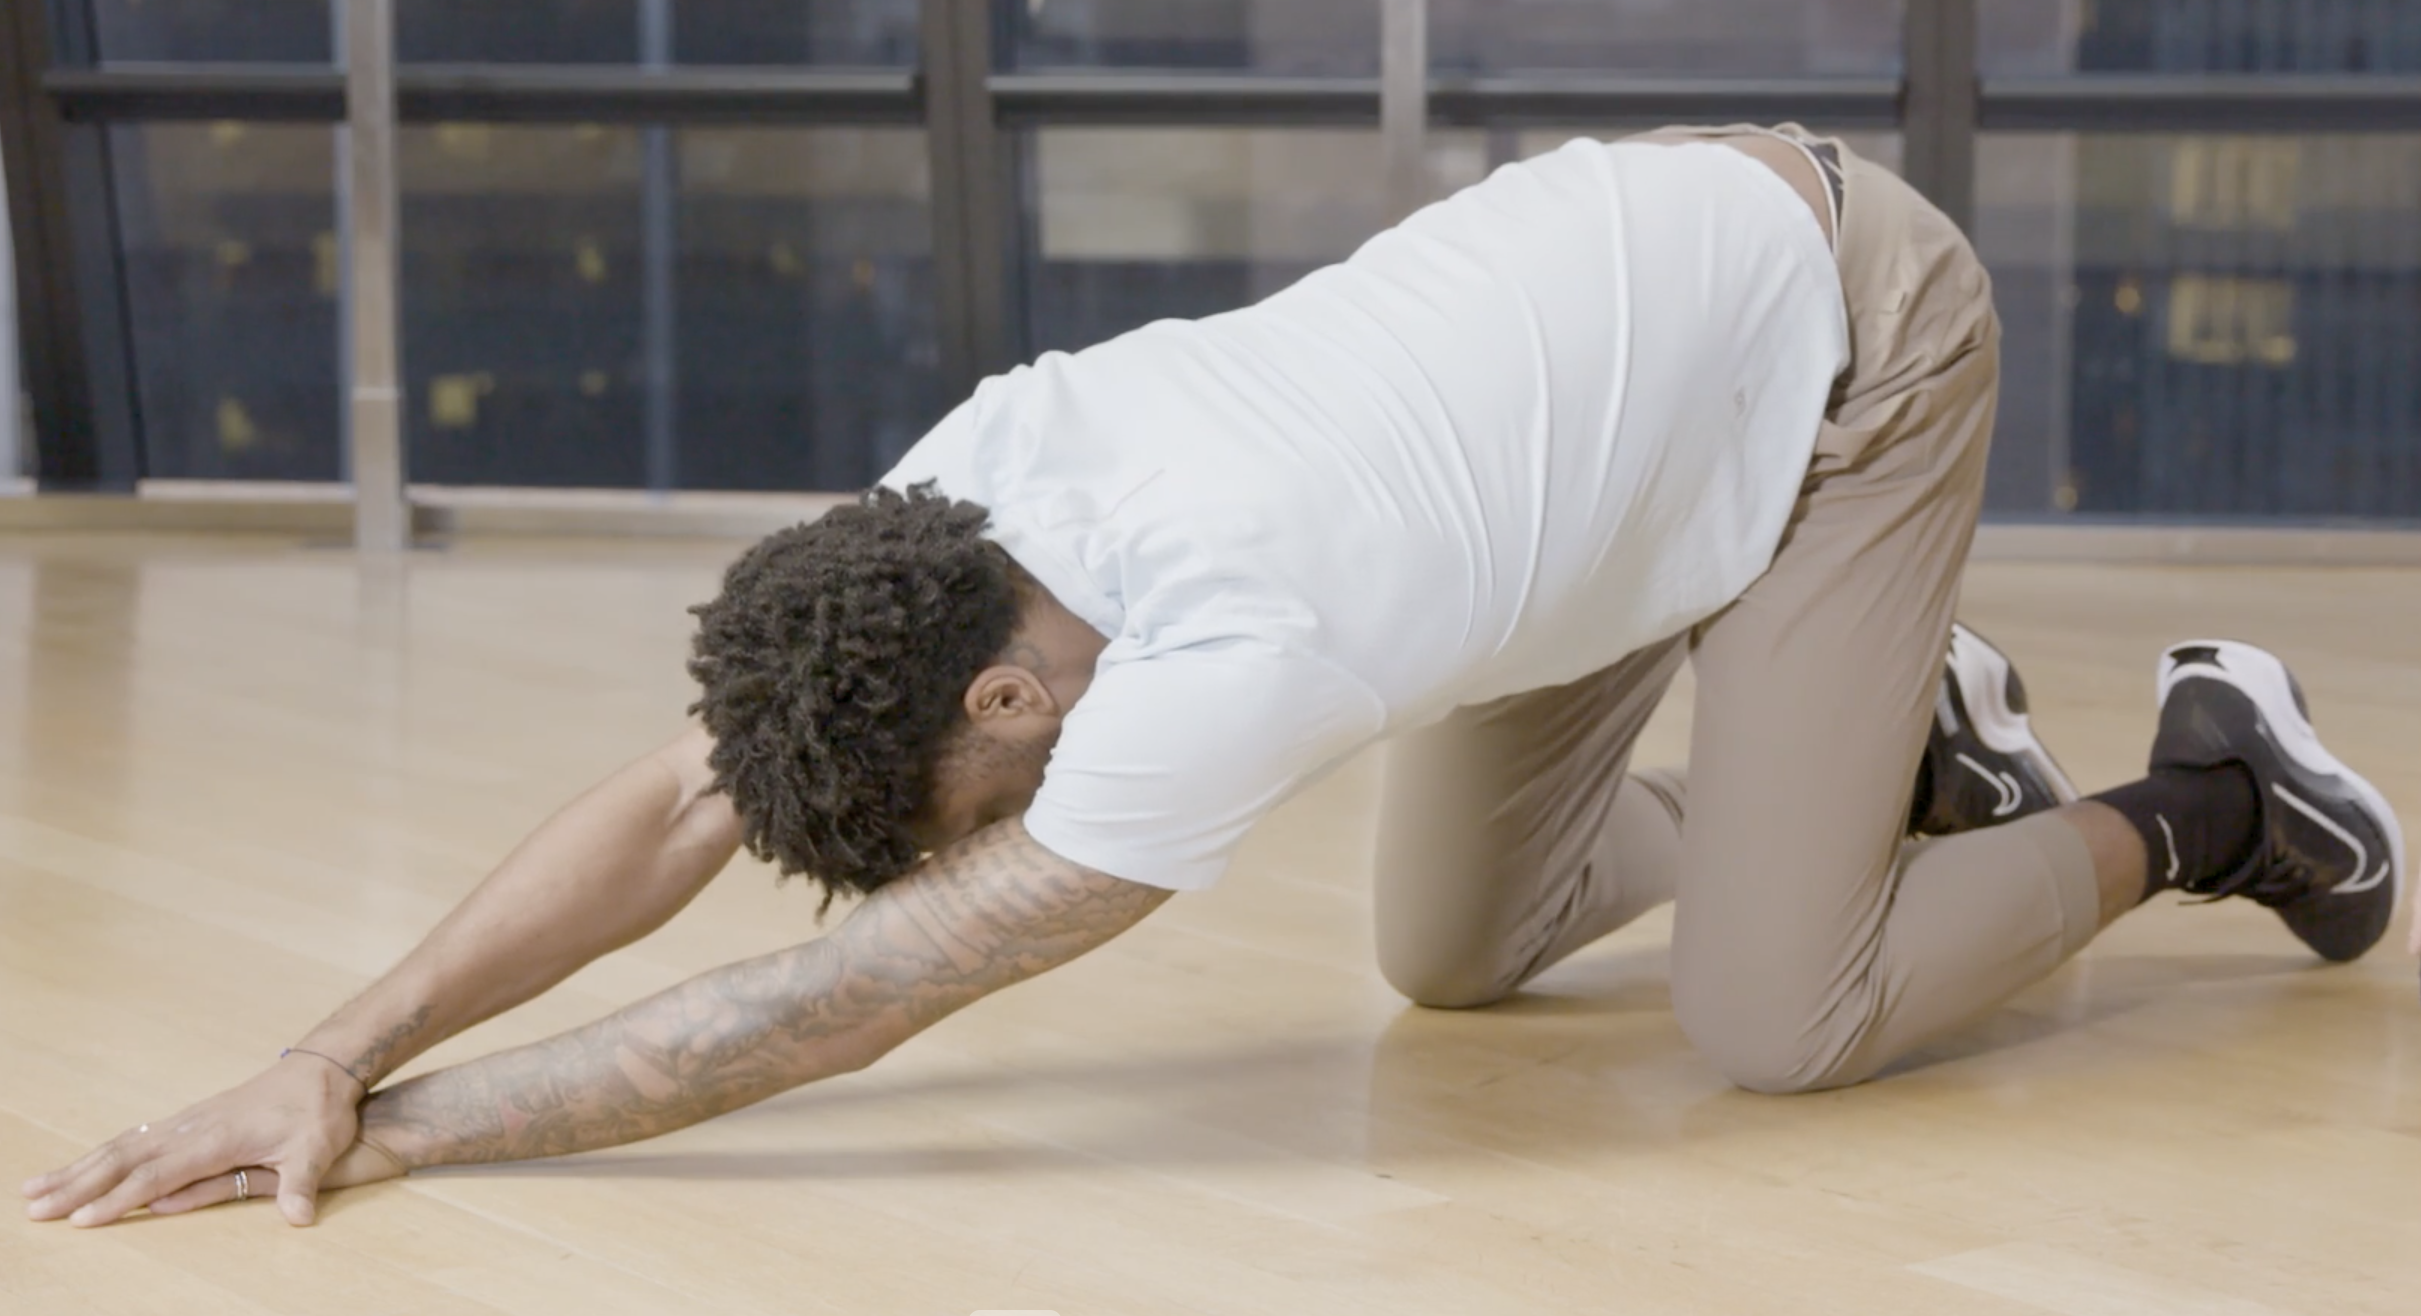 4 Exercises To Try If You're Suffering From Hip Pain